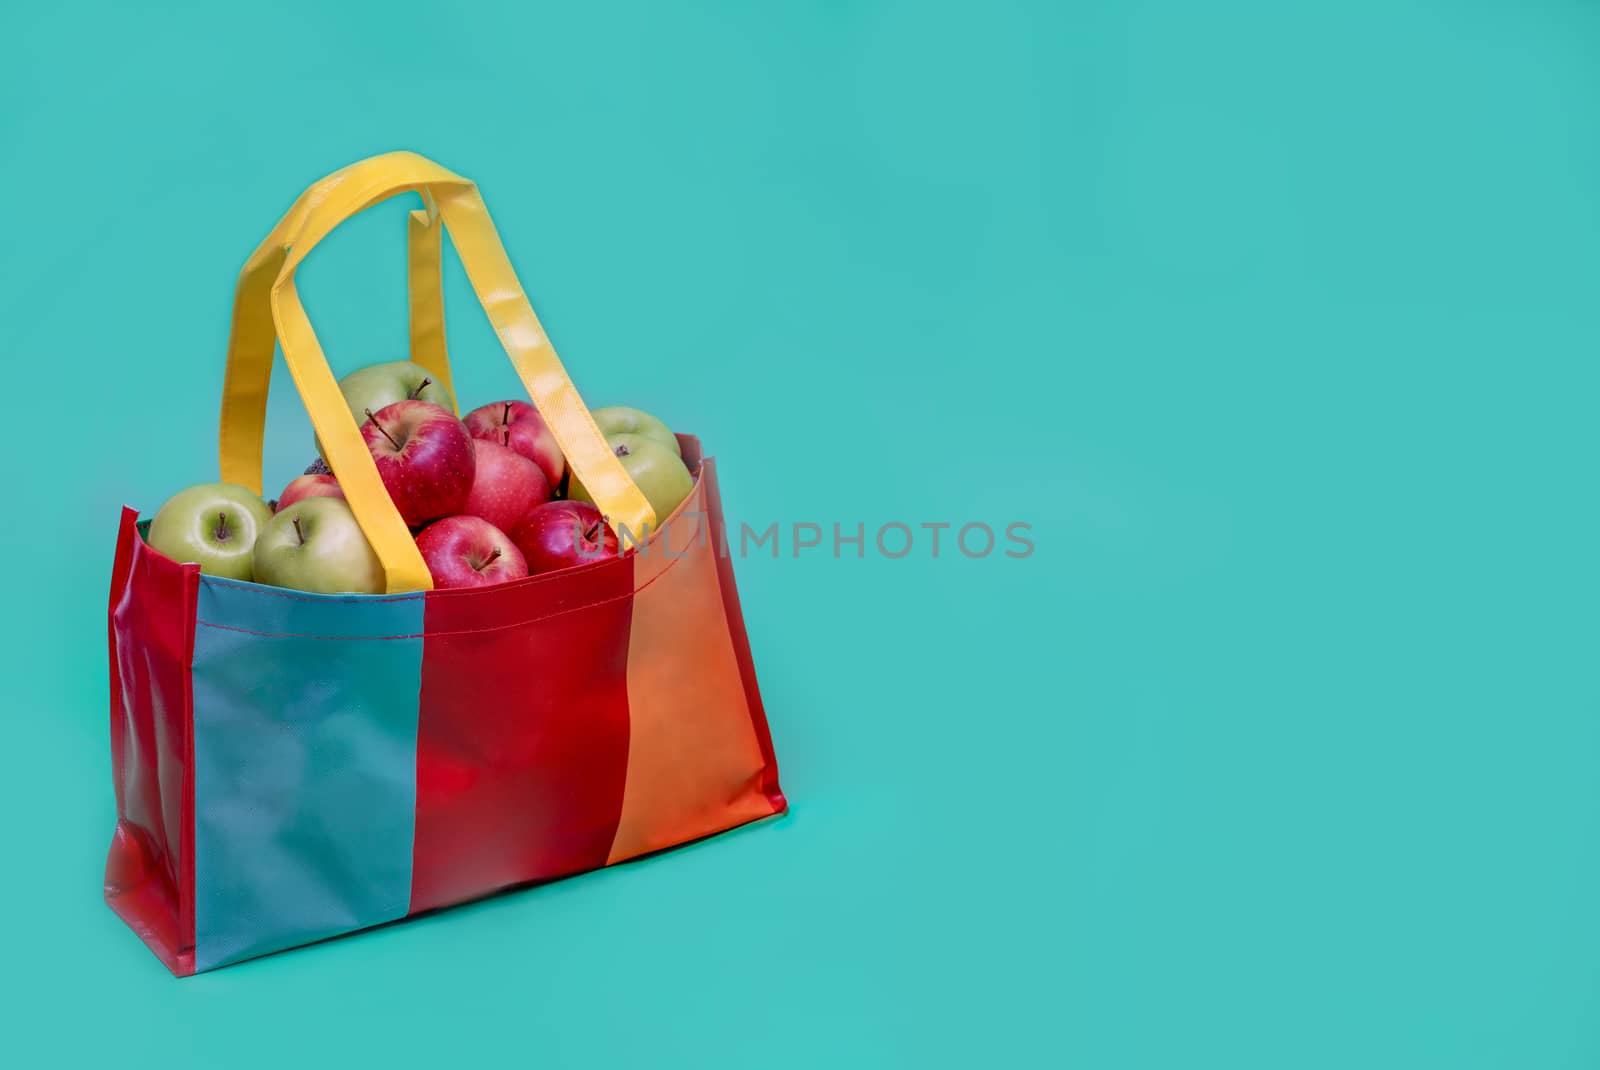 Red and green apples in colorful recycled plastic bag . Recycled plastic bag campaign advertising and healthy living concepts. Teal background.